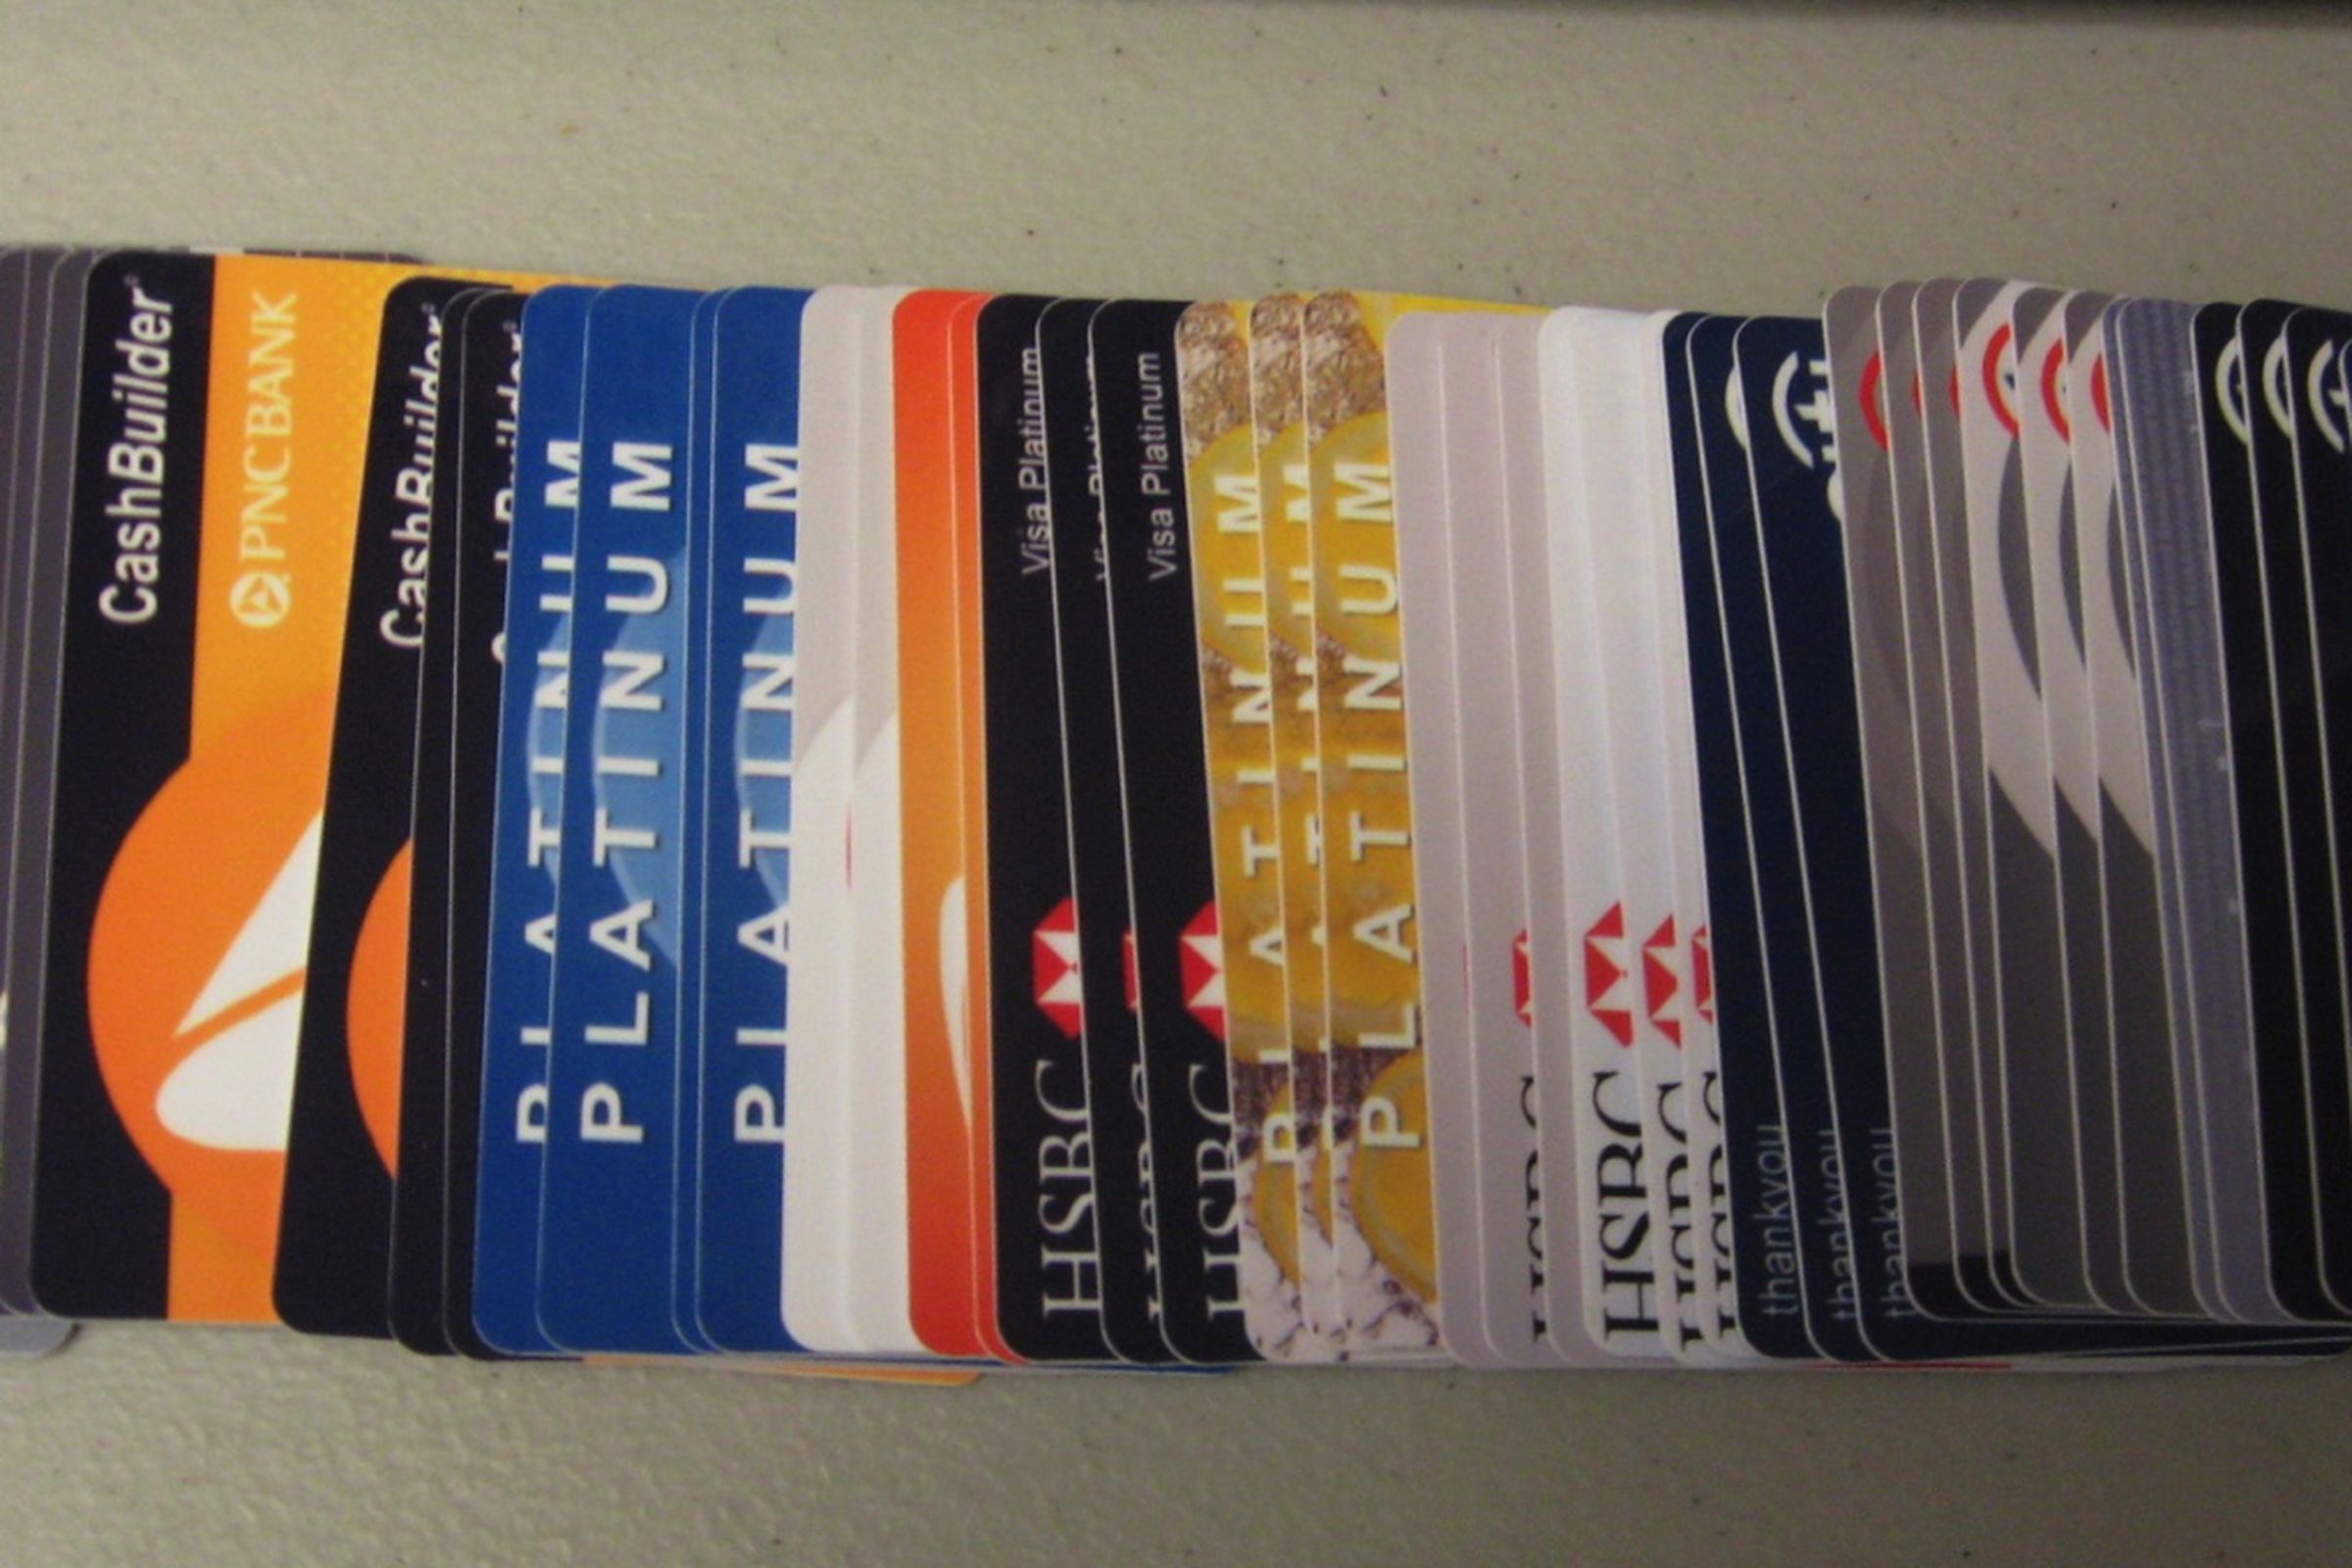 Credit Cards Seized by the Department of Justice